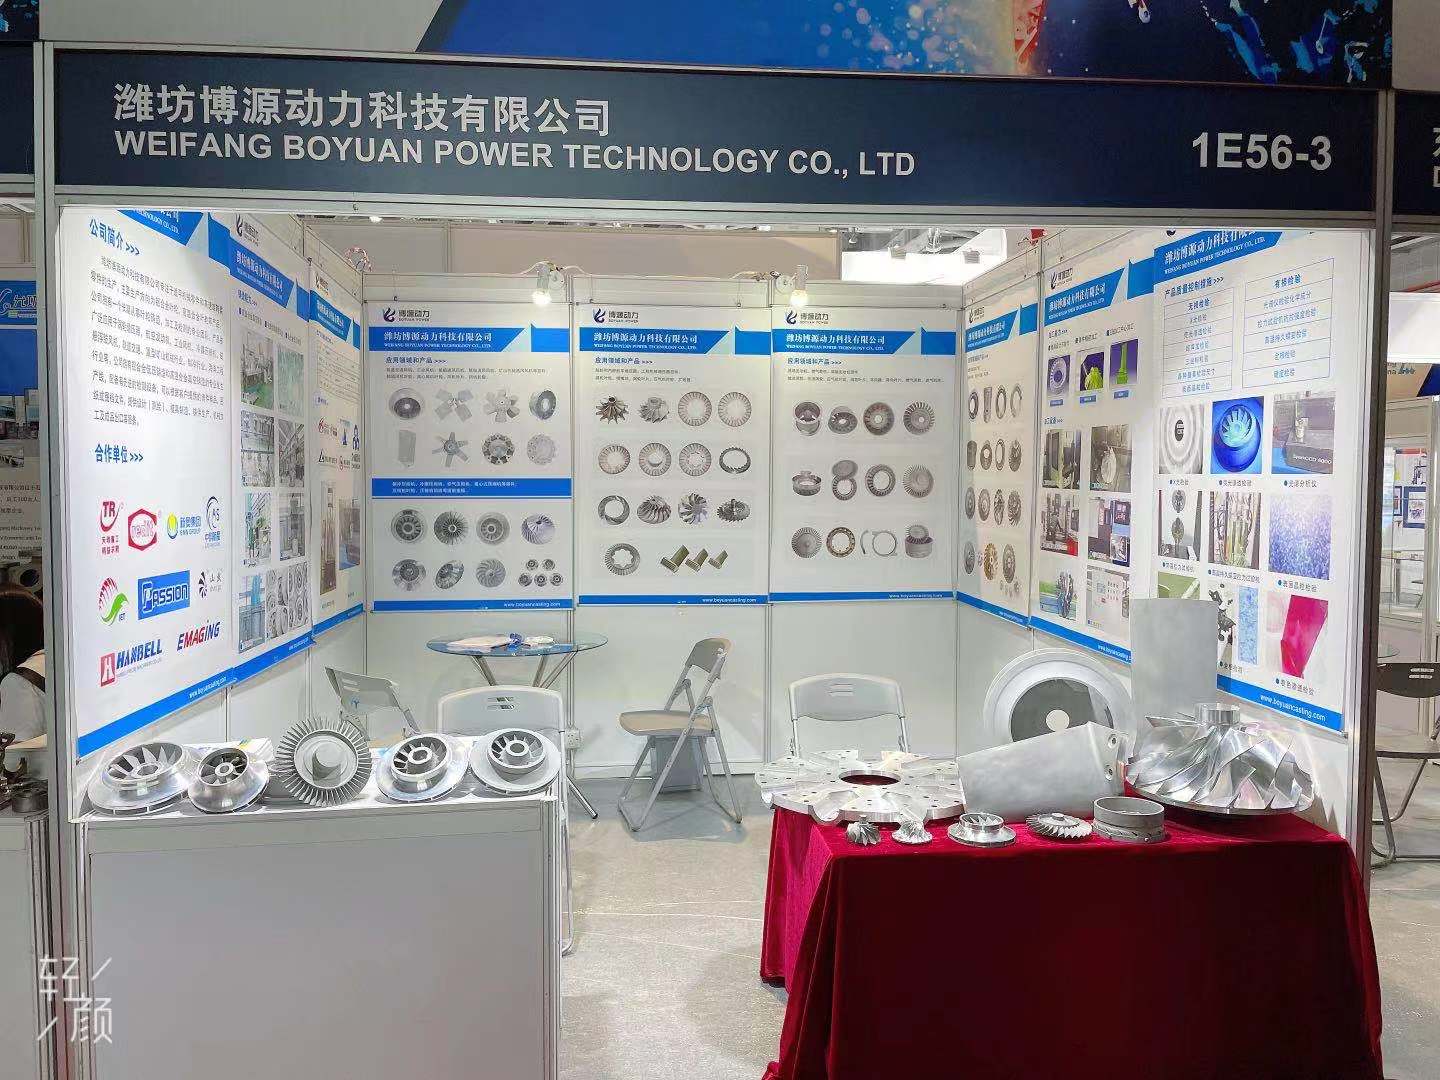 Our company will participate in the 19th China International Foundry Fair in 2021